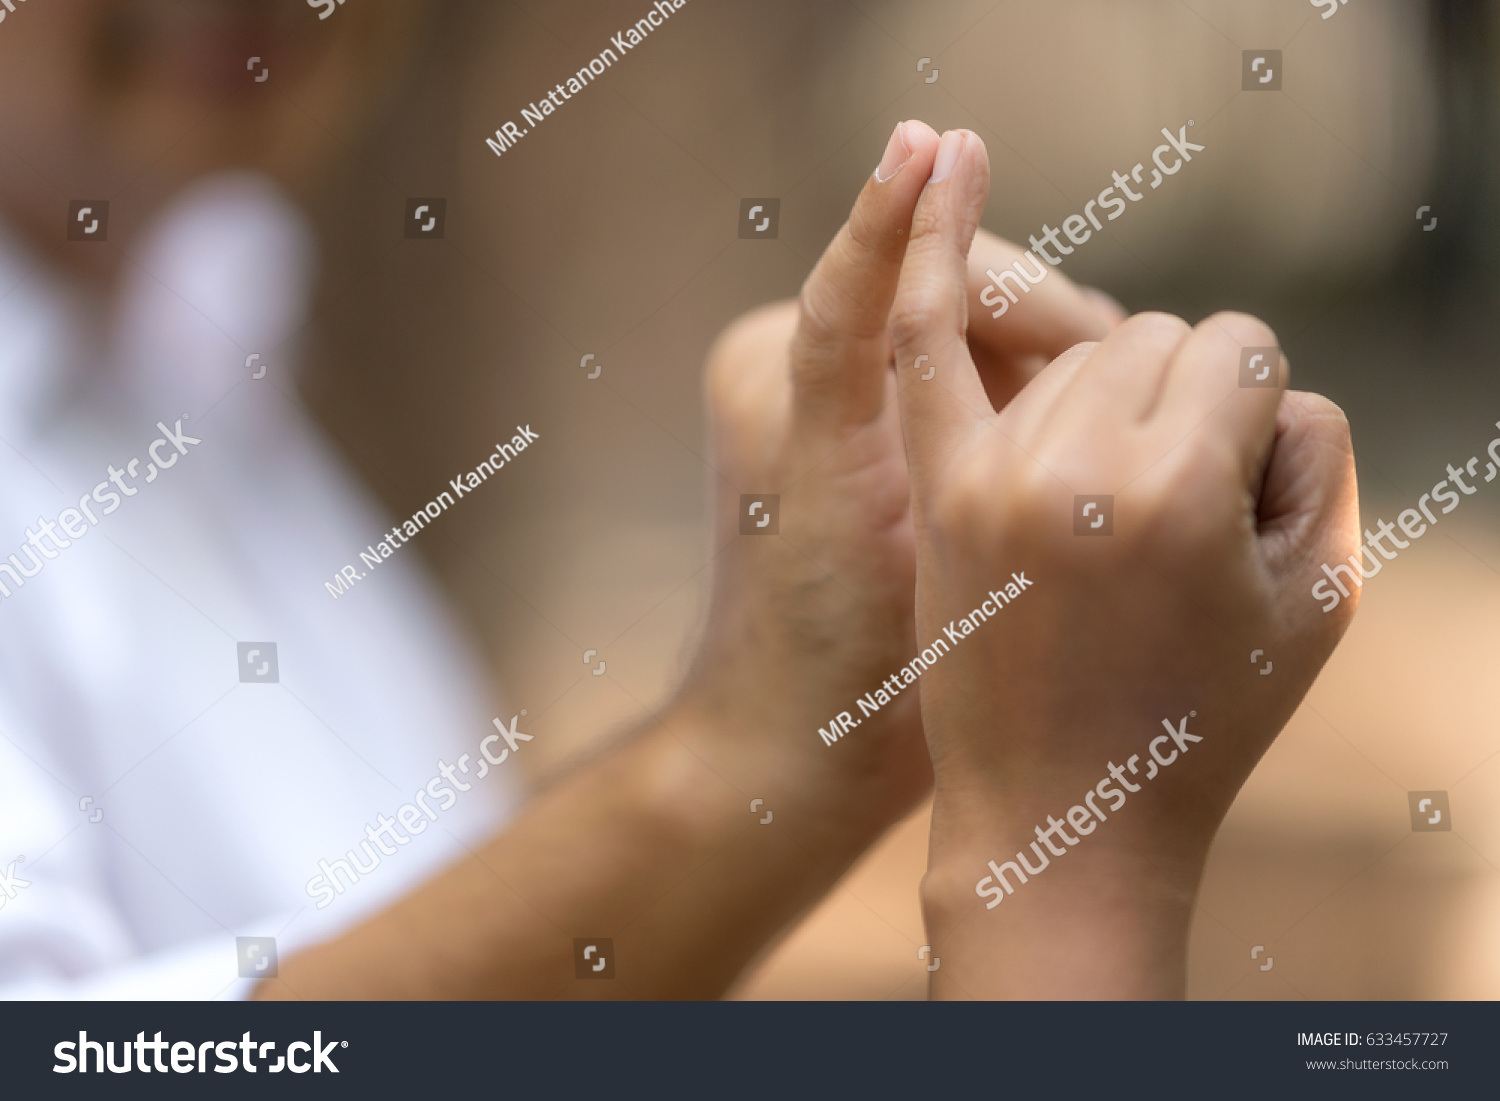 Linking little fingers with somebody to confirm promise.Hands posing together concept. #633457727